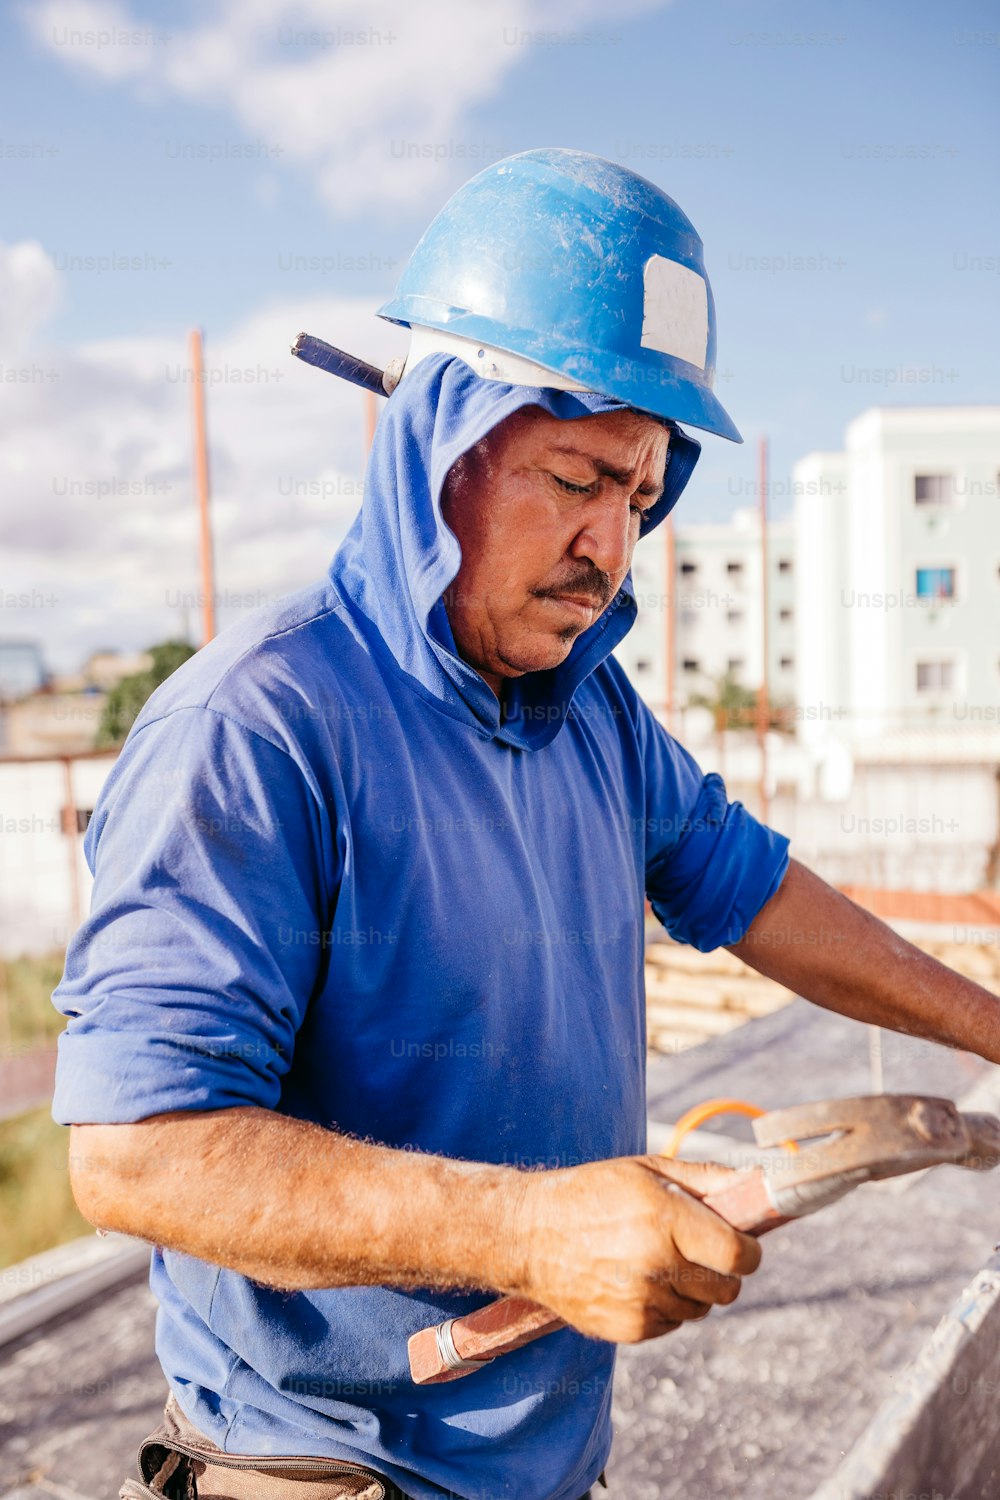 a man in a blue shirt and a hard hat working on a roof